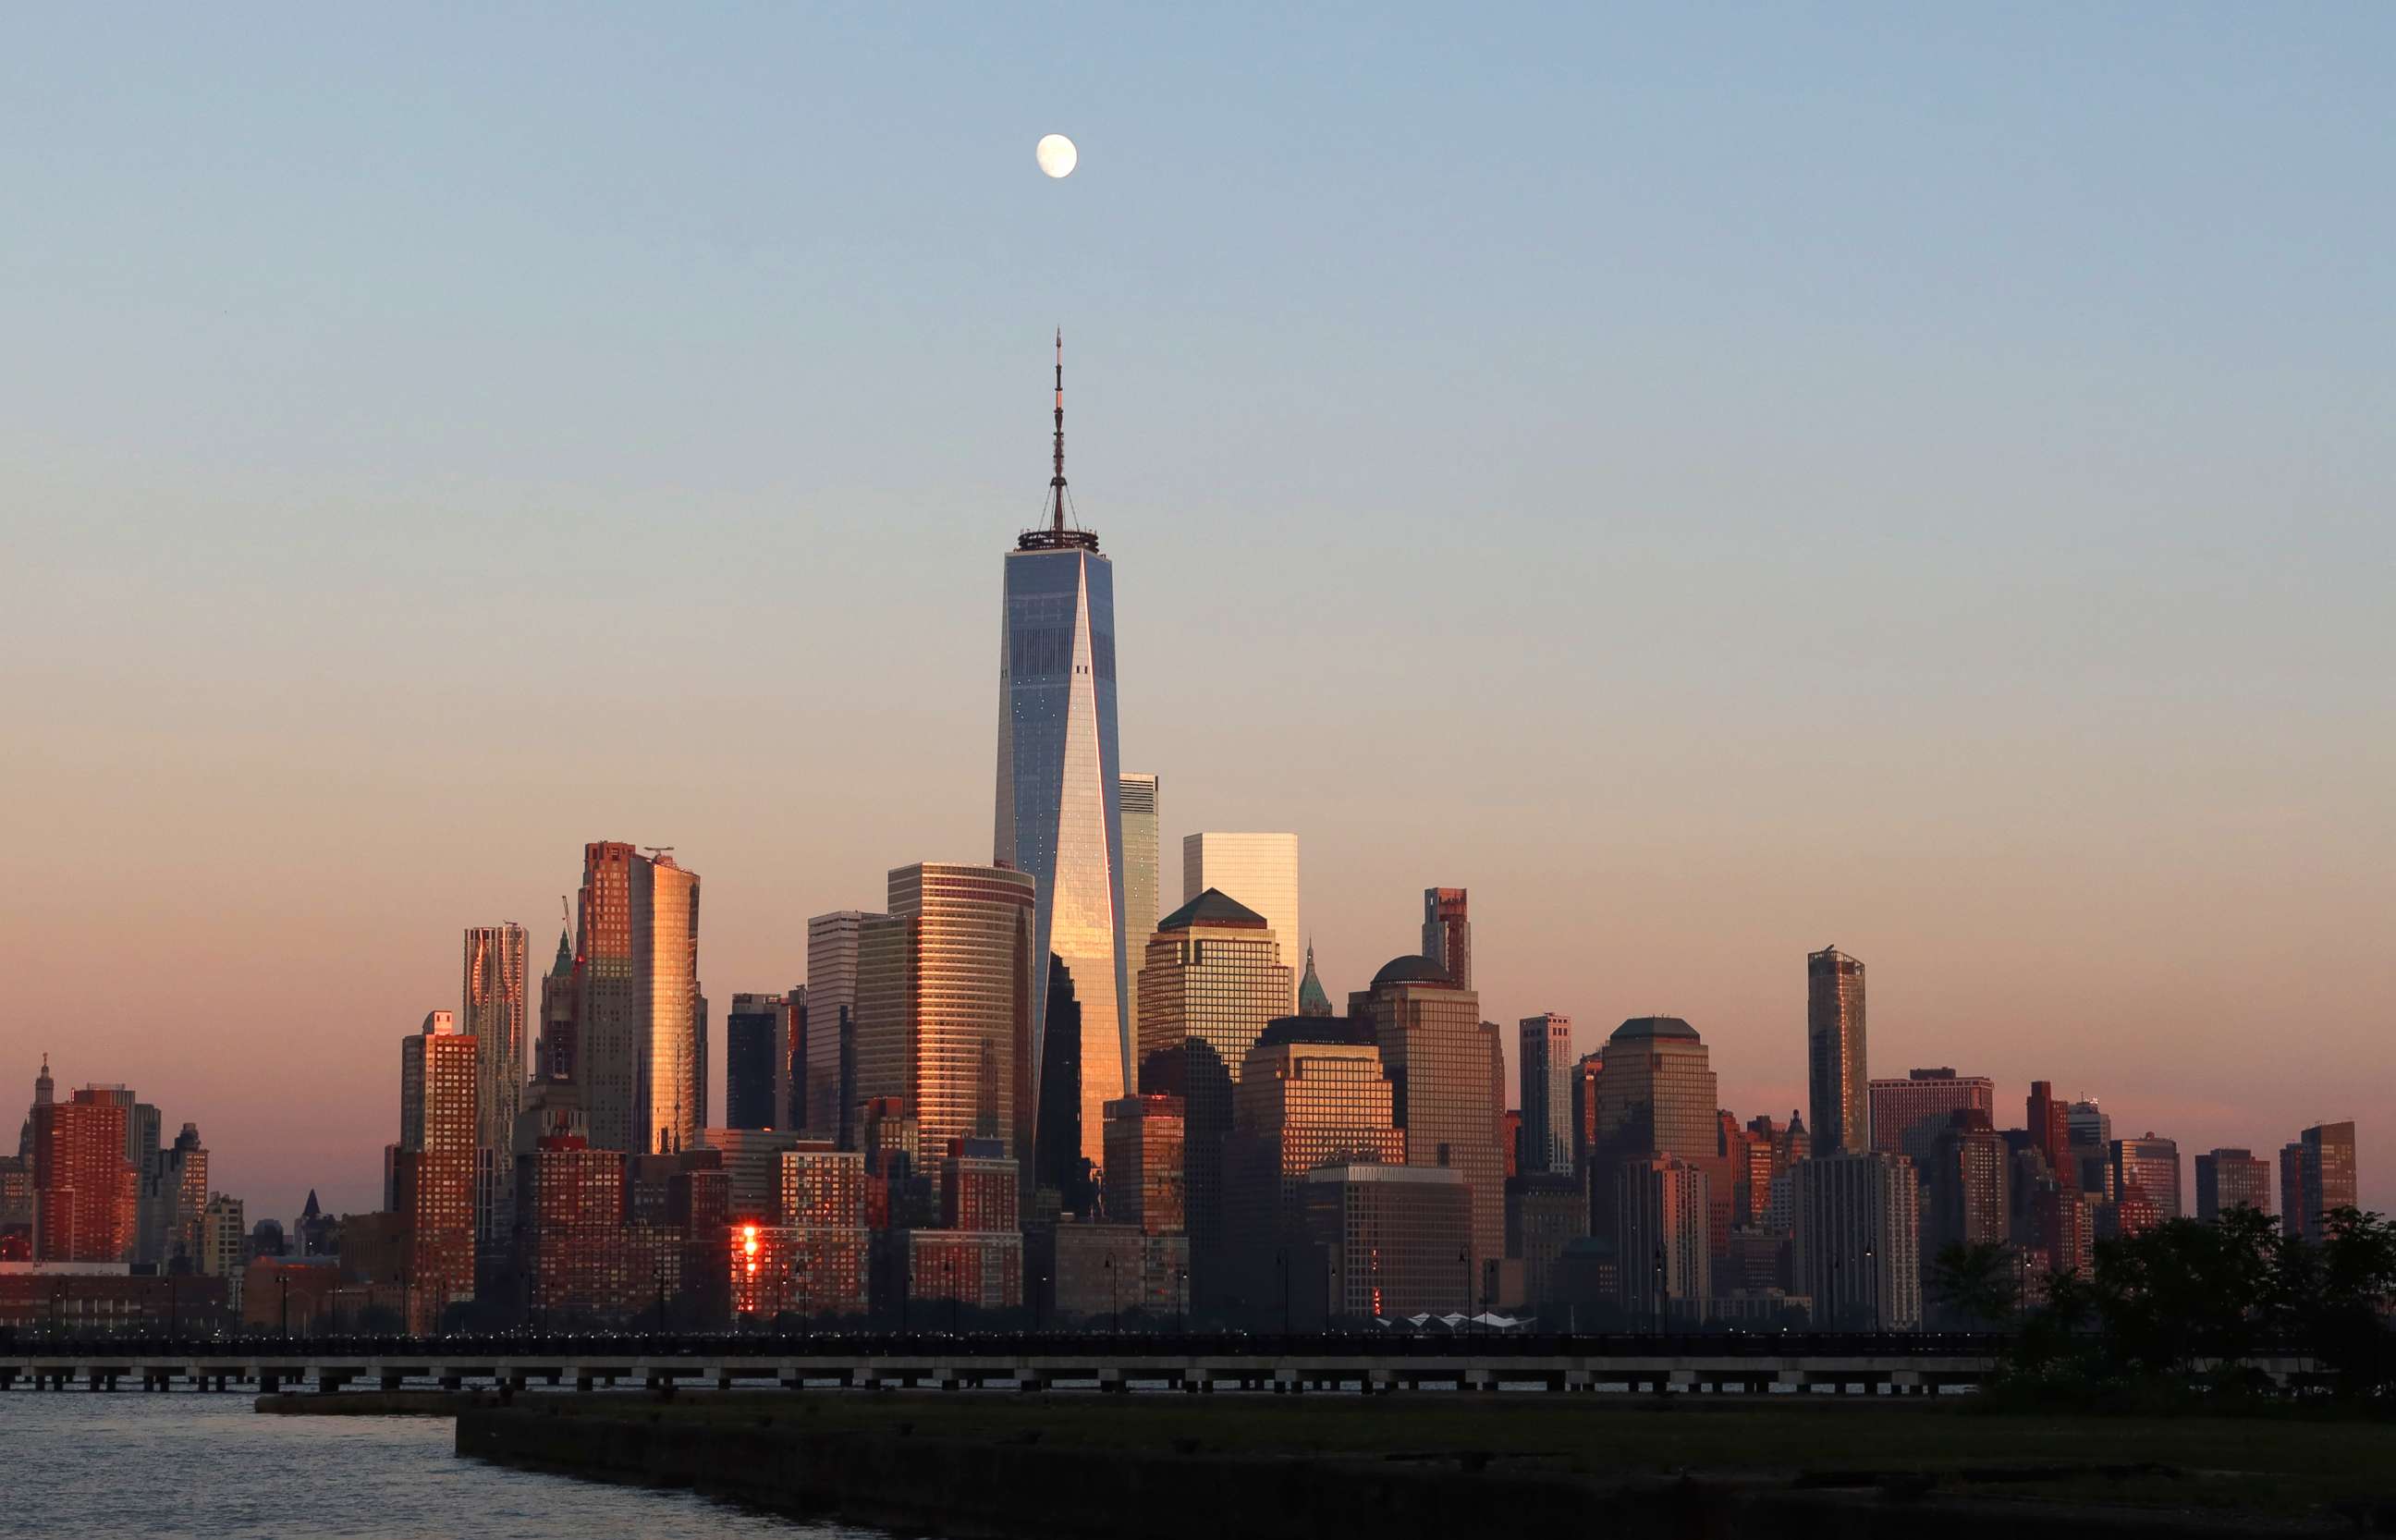 PHOTO: The moon rises as the sun sets on the skyline of lower Manhattan and One World Trade Center in New York City on July 31, 2020, as seen from Jersey City, New Jersey.